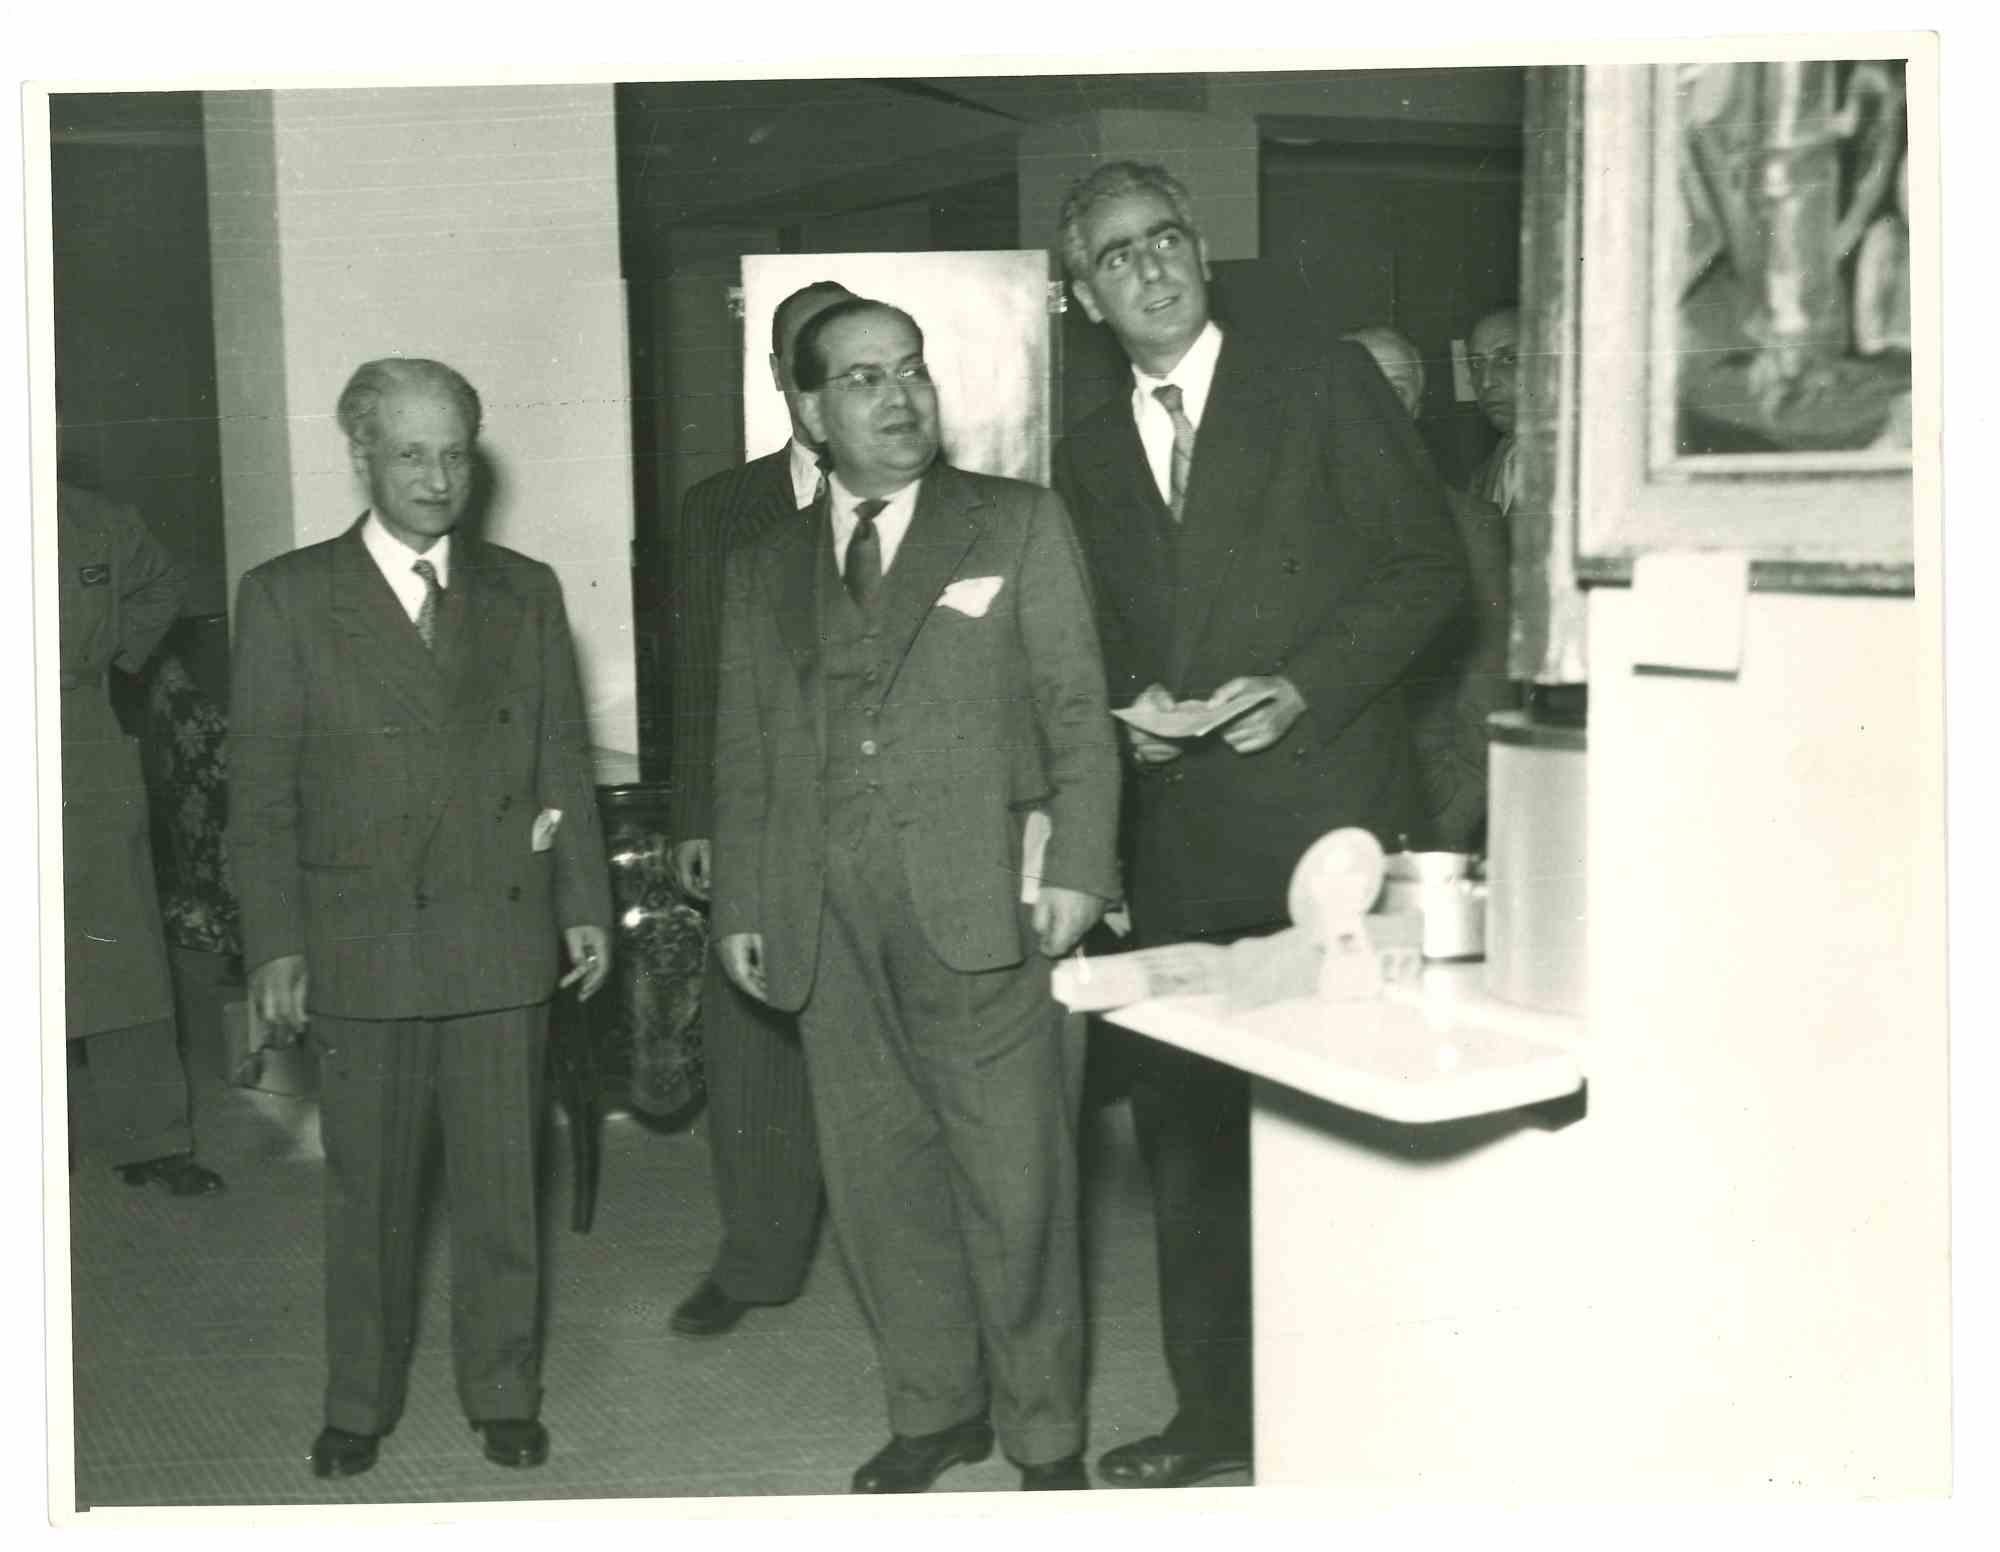 Unknown Portrait Photograph - Exhibition- Culture in Italy- Photo - 1960s